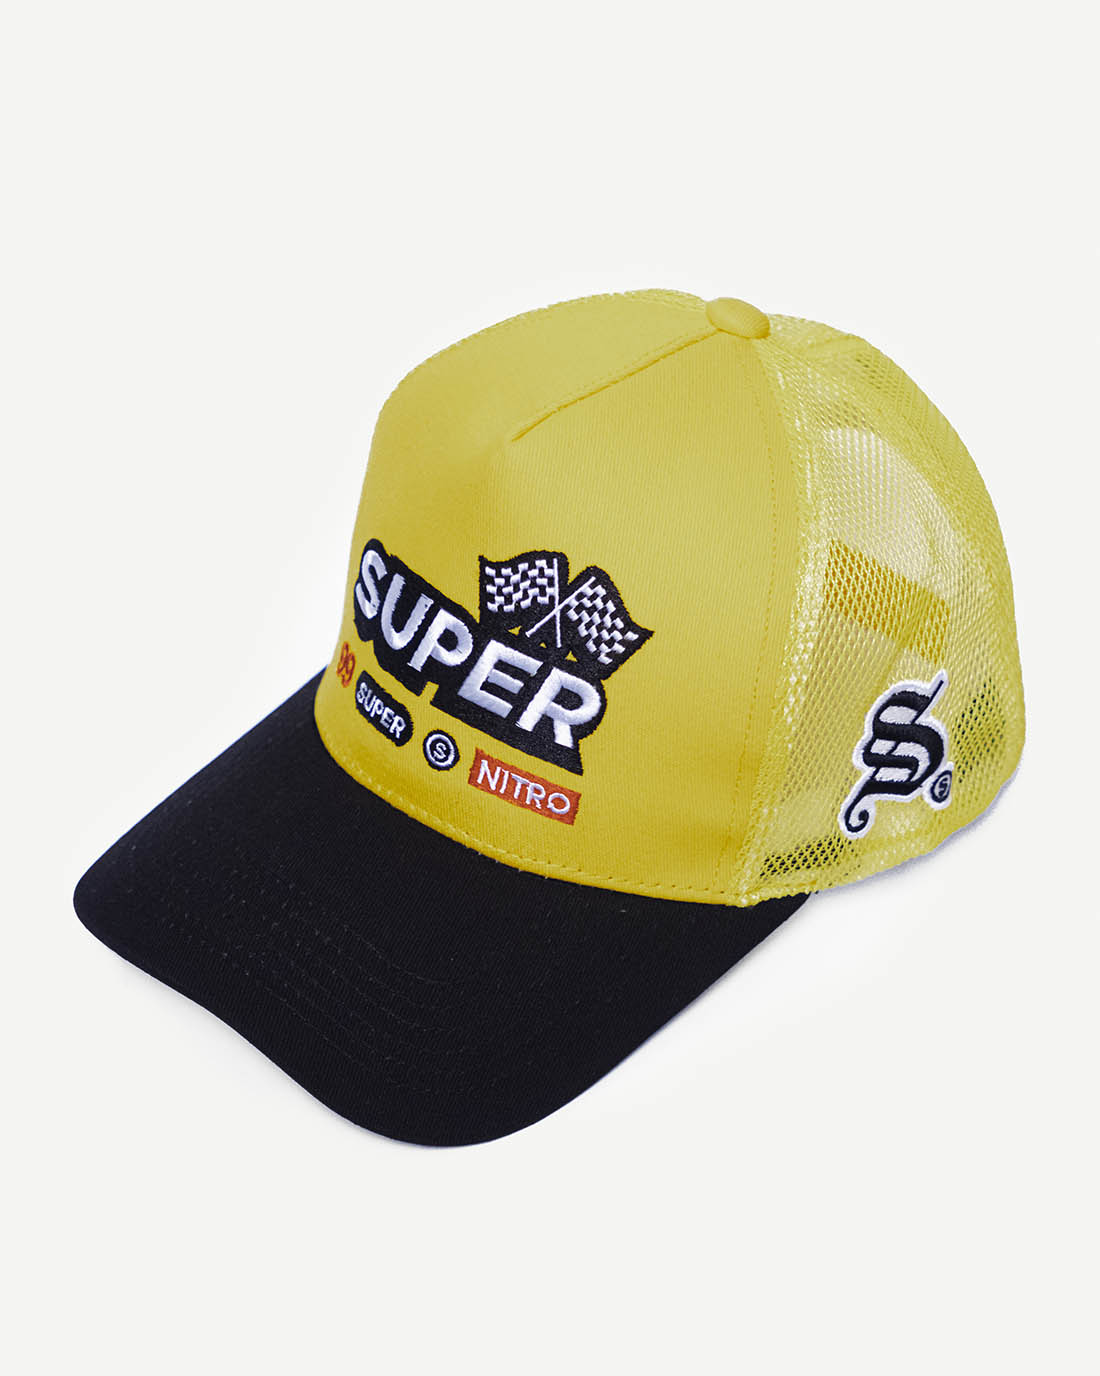 Front view of a two-tone black and yellow snapback hat with stylish racing-inspired embroidered design and cooling mesh back.